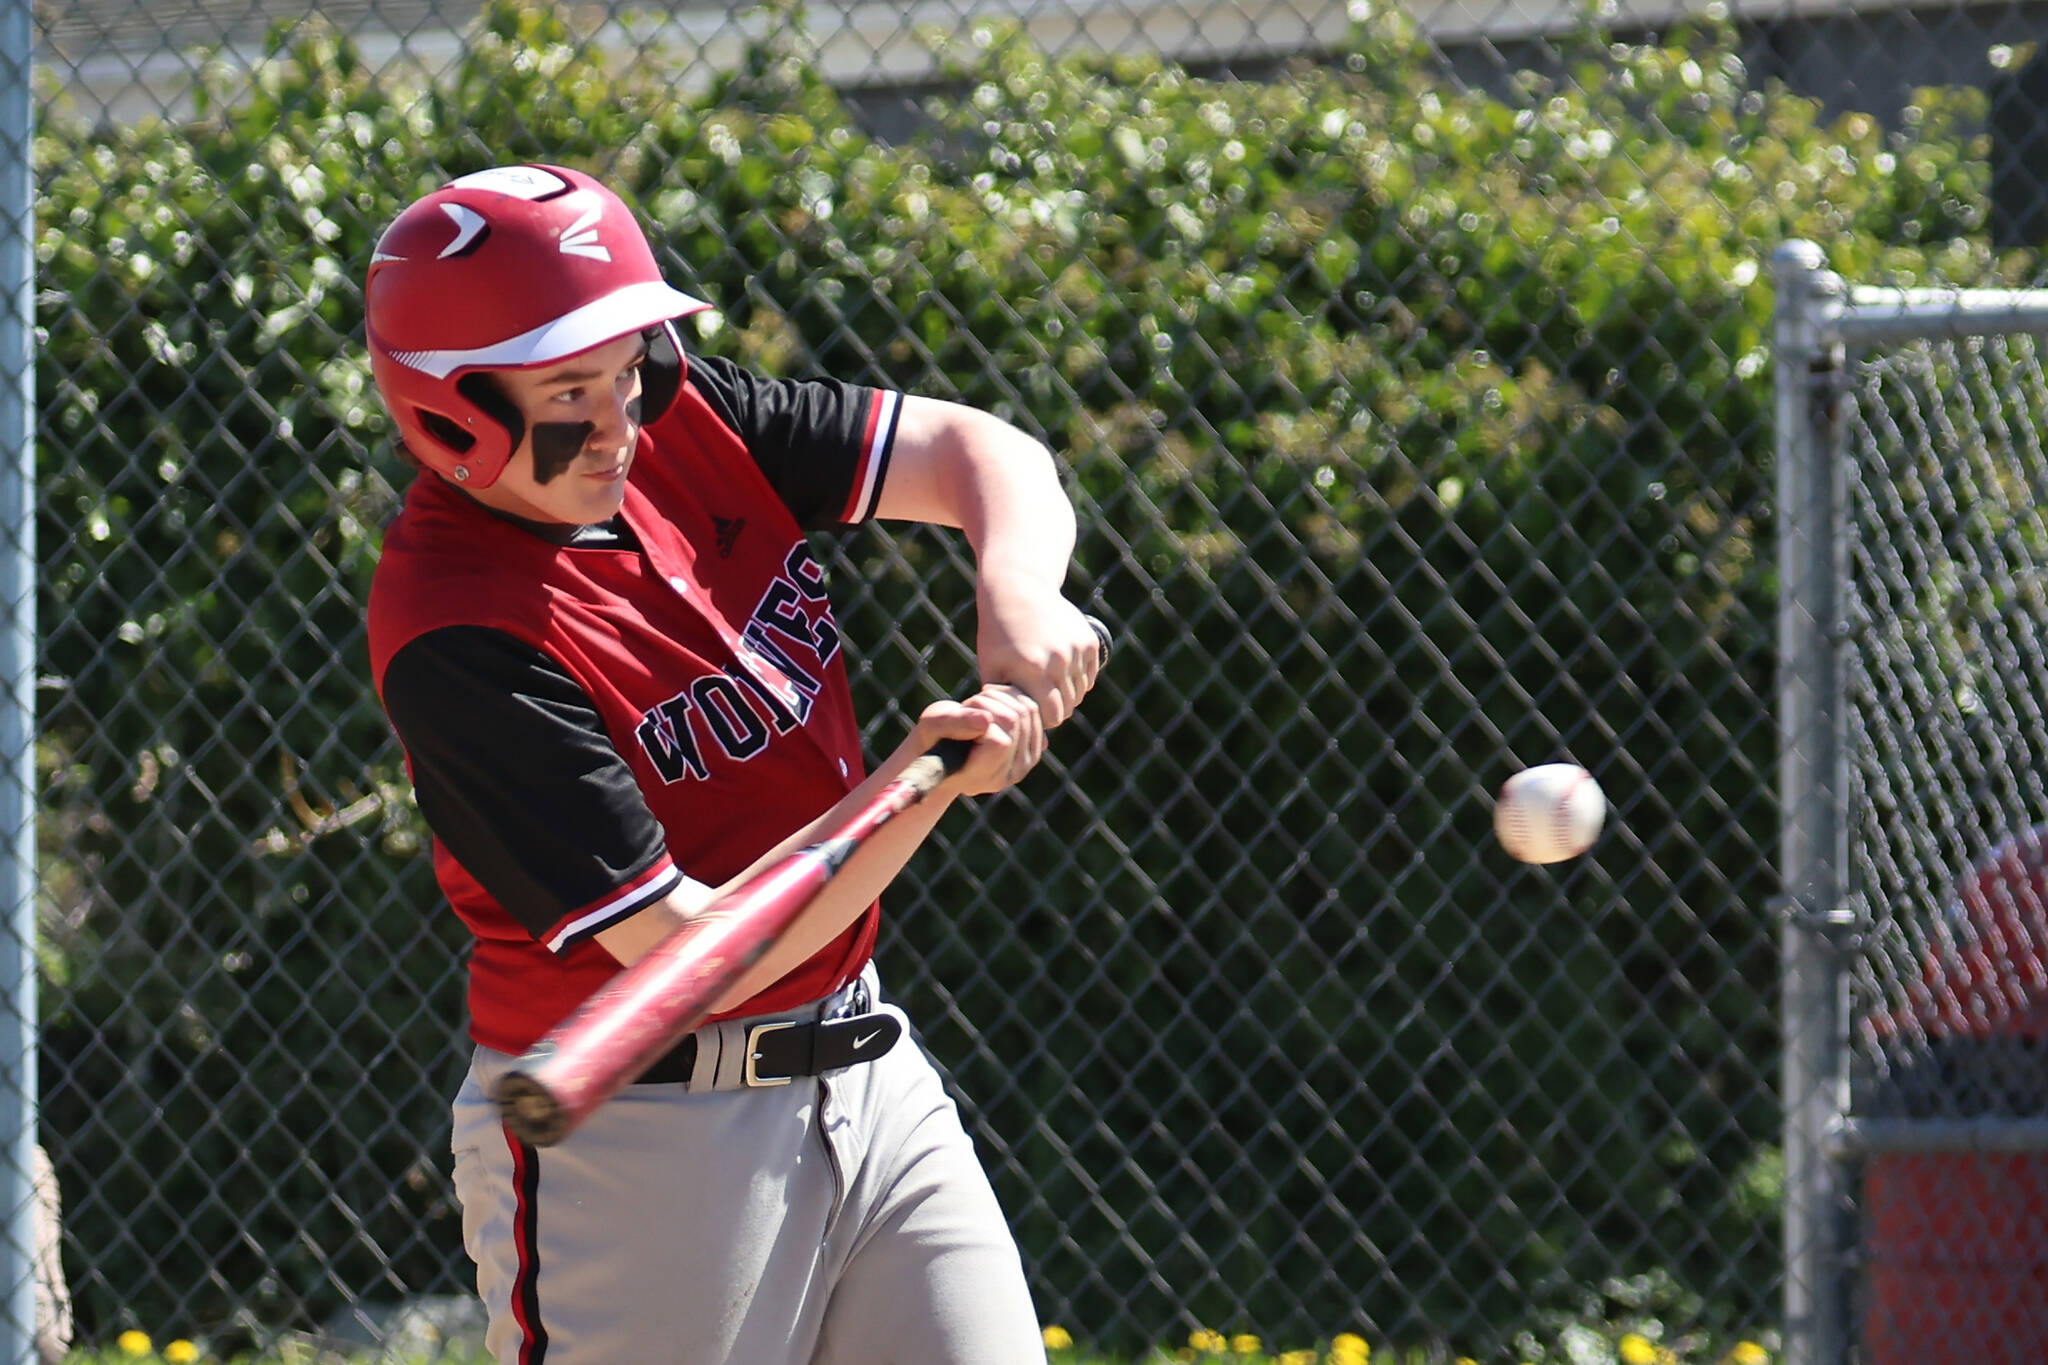 Photo by John Fisken
Coupeville High School freshman Coop Cooper hits in a game against La Conner April 29. The Wolves won 14-1.